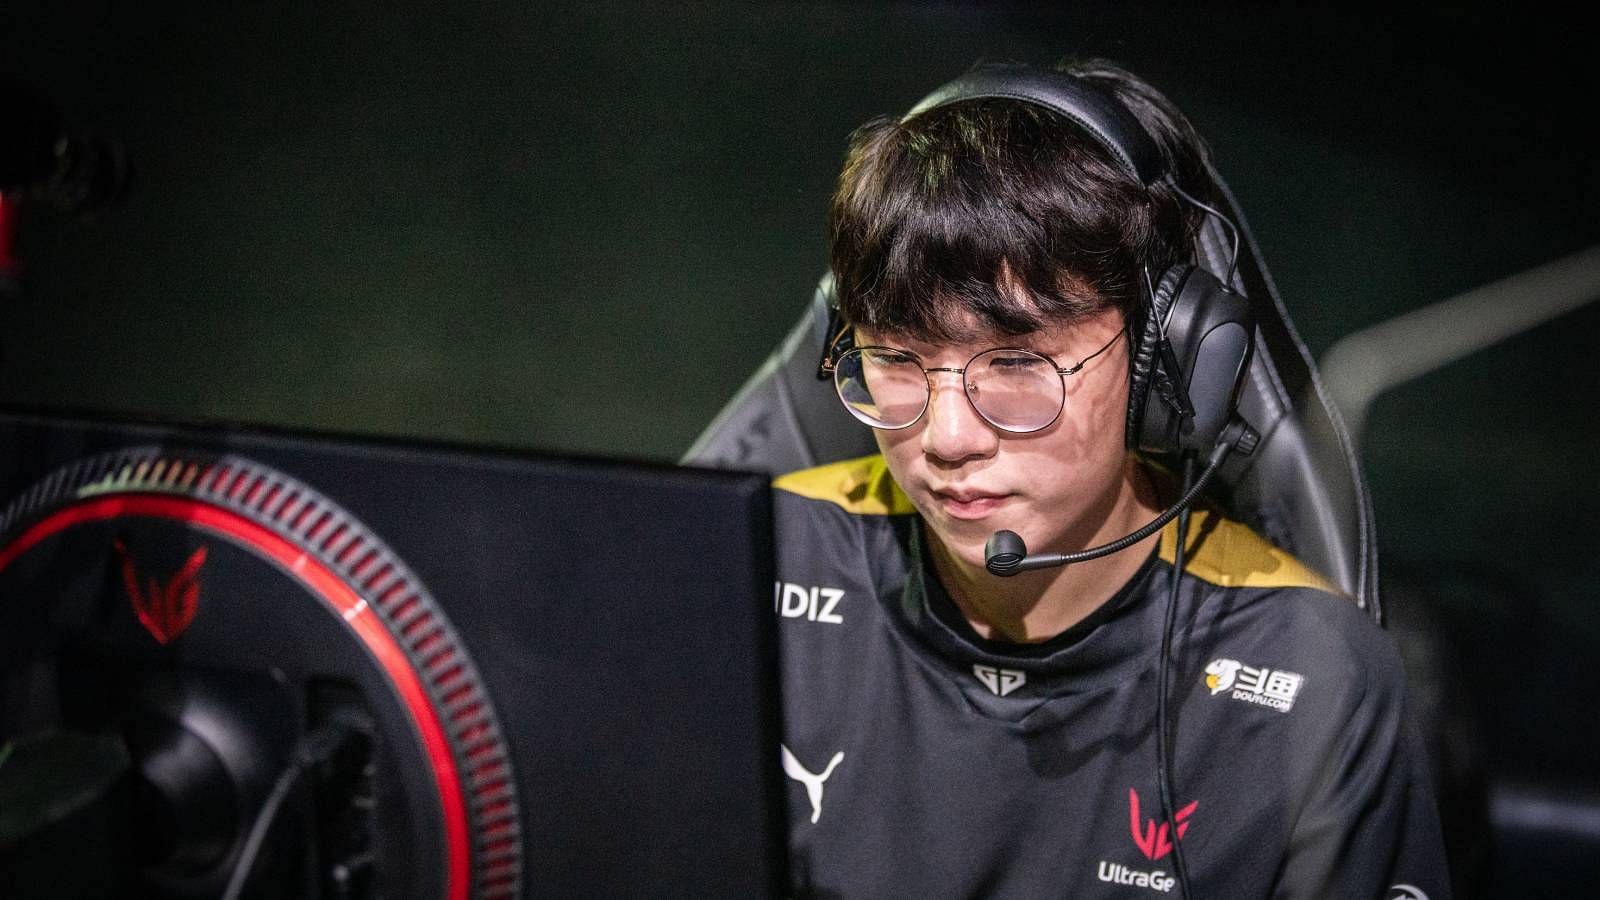 Ruler is one of the key players for Gen.G and will be hungry for the Worlds 2022 title (Image via League of Legends)